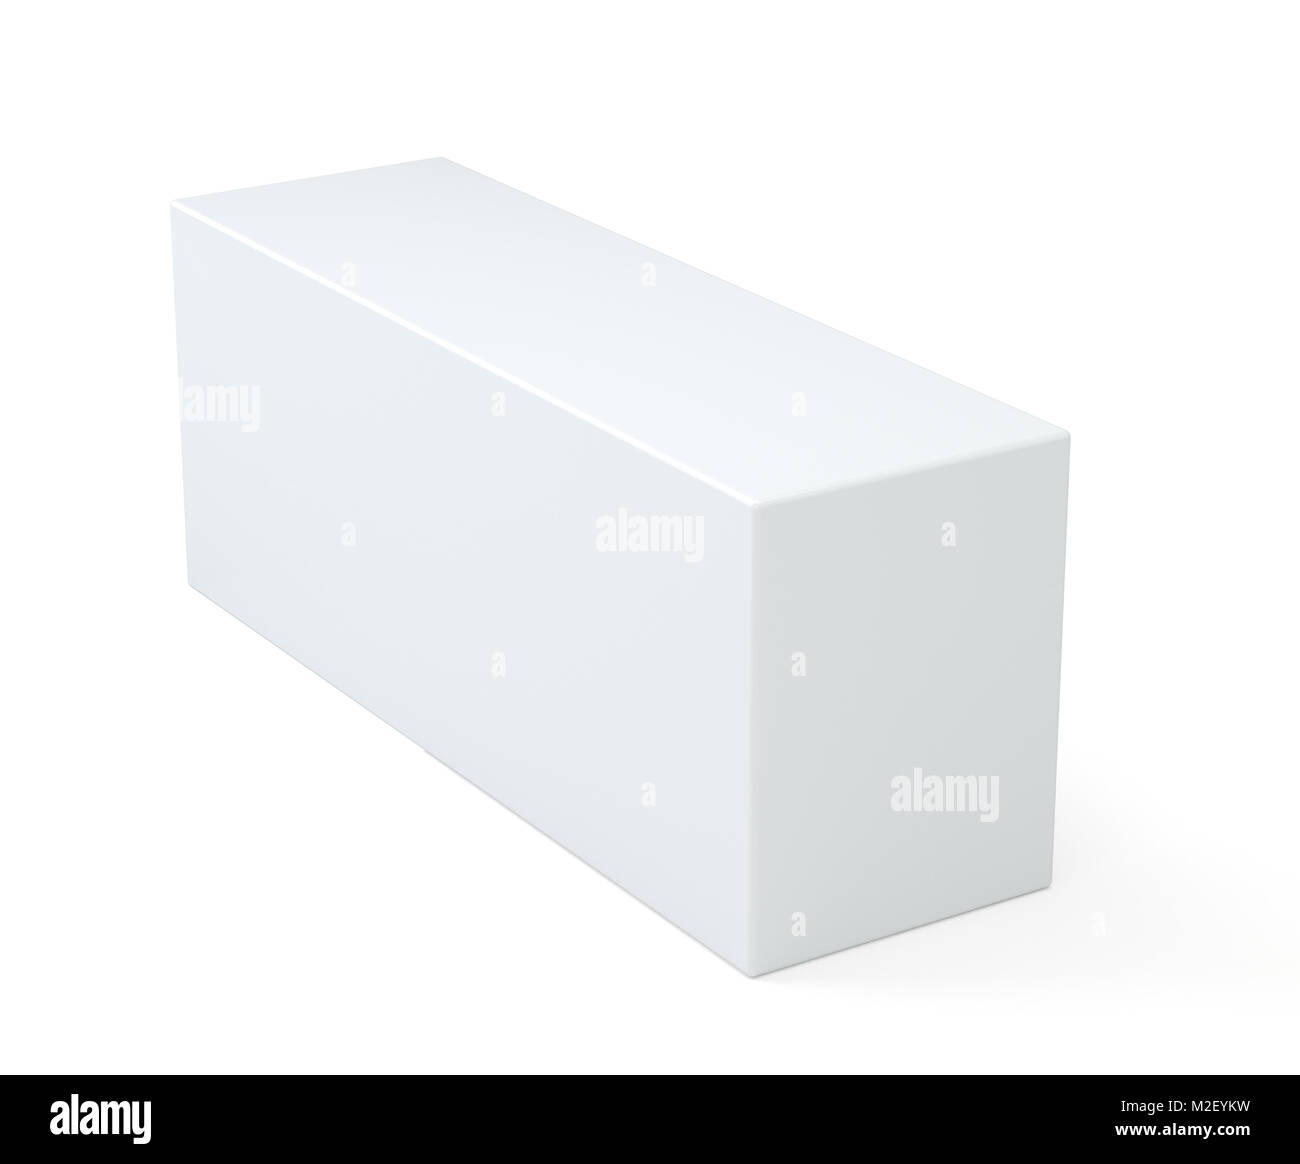 Blank white cube product packaging paper cardboard box. 3d illustration Stock Photo